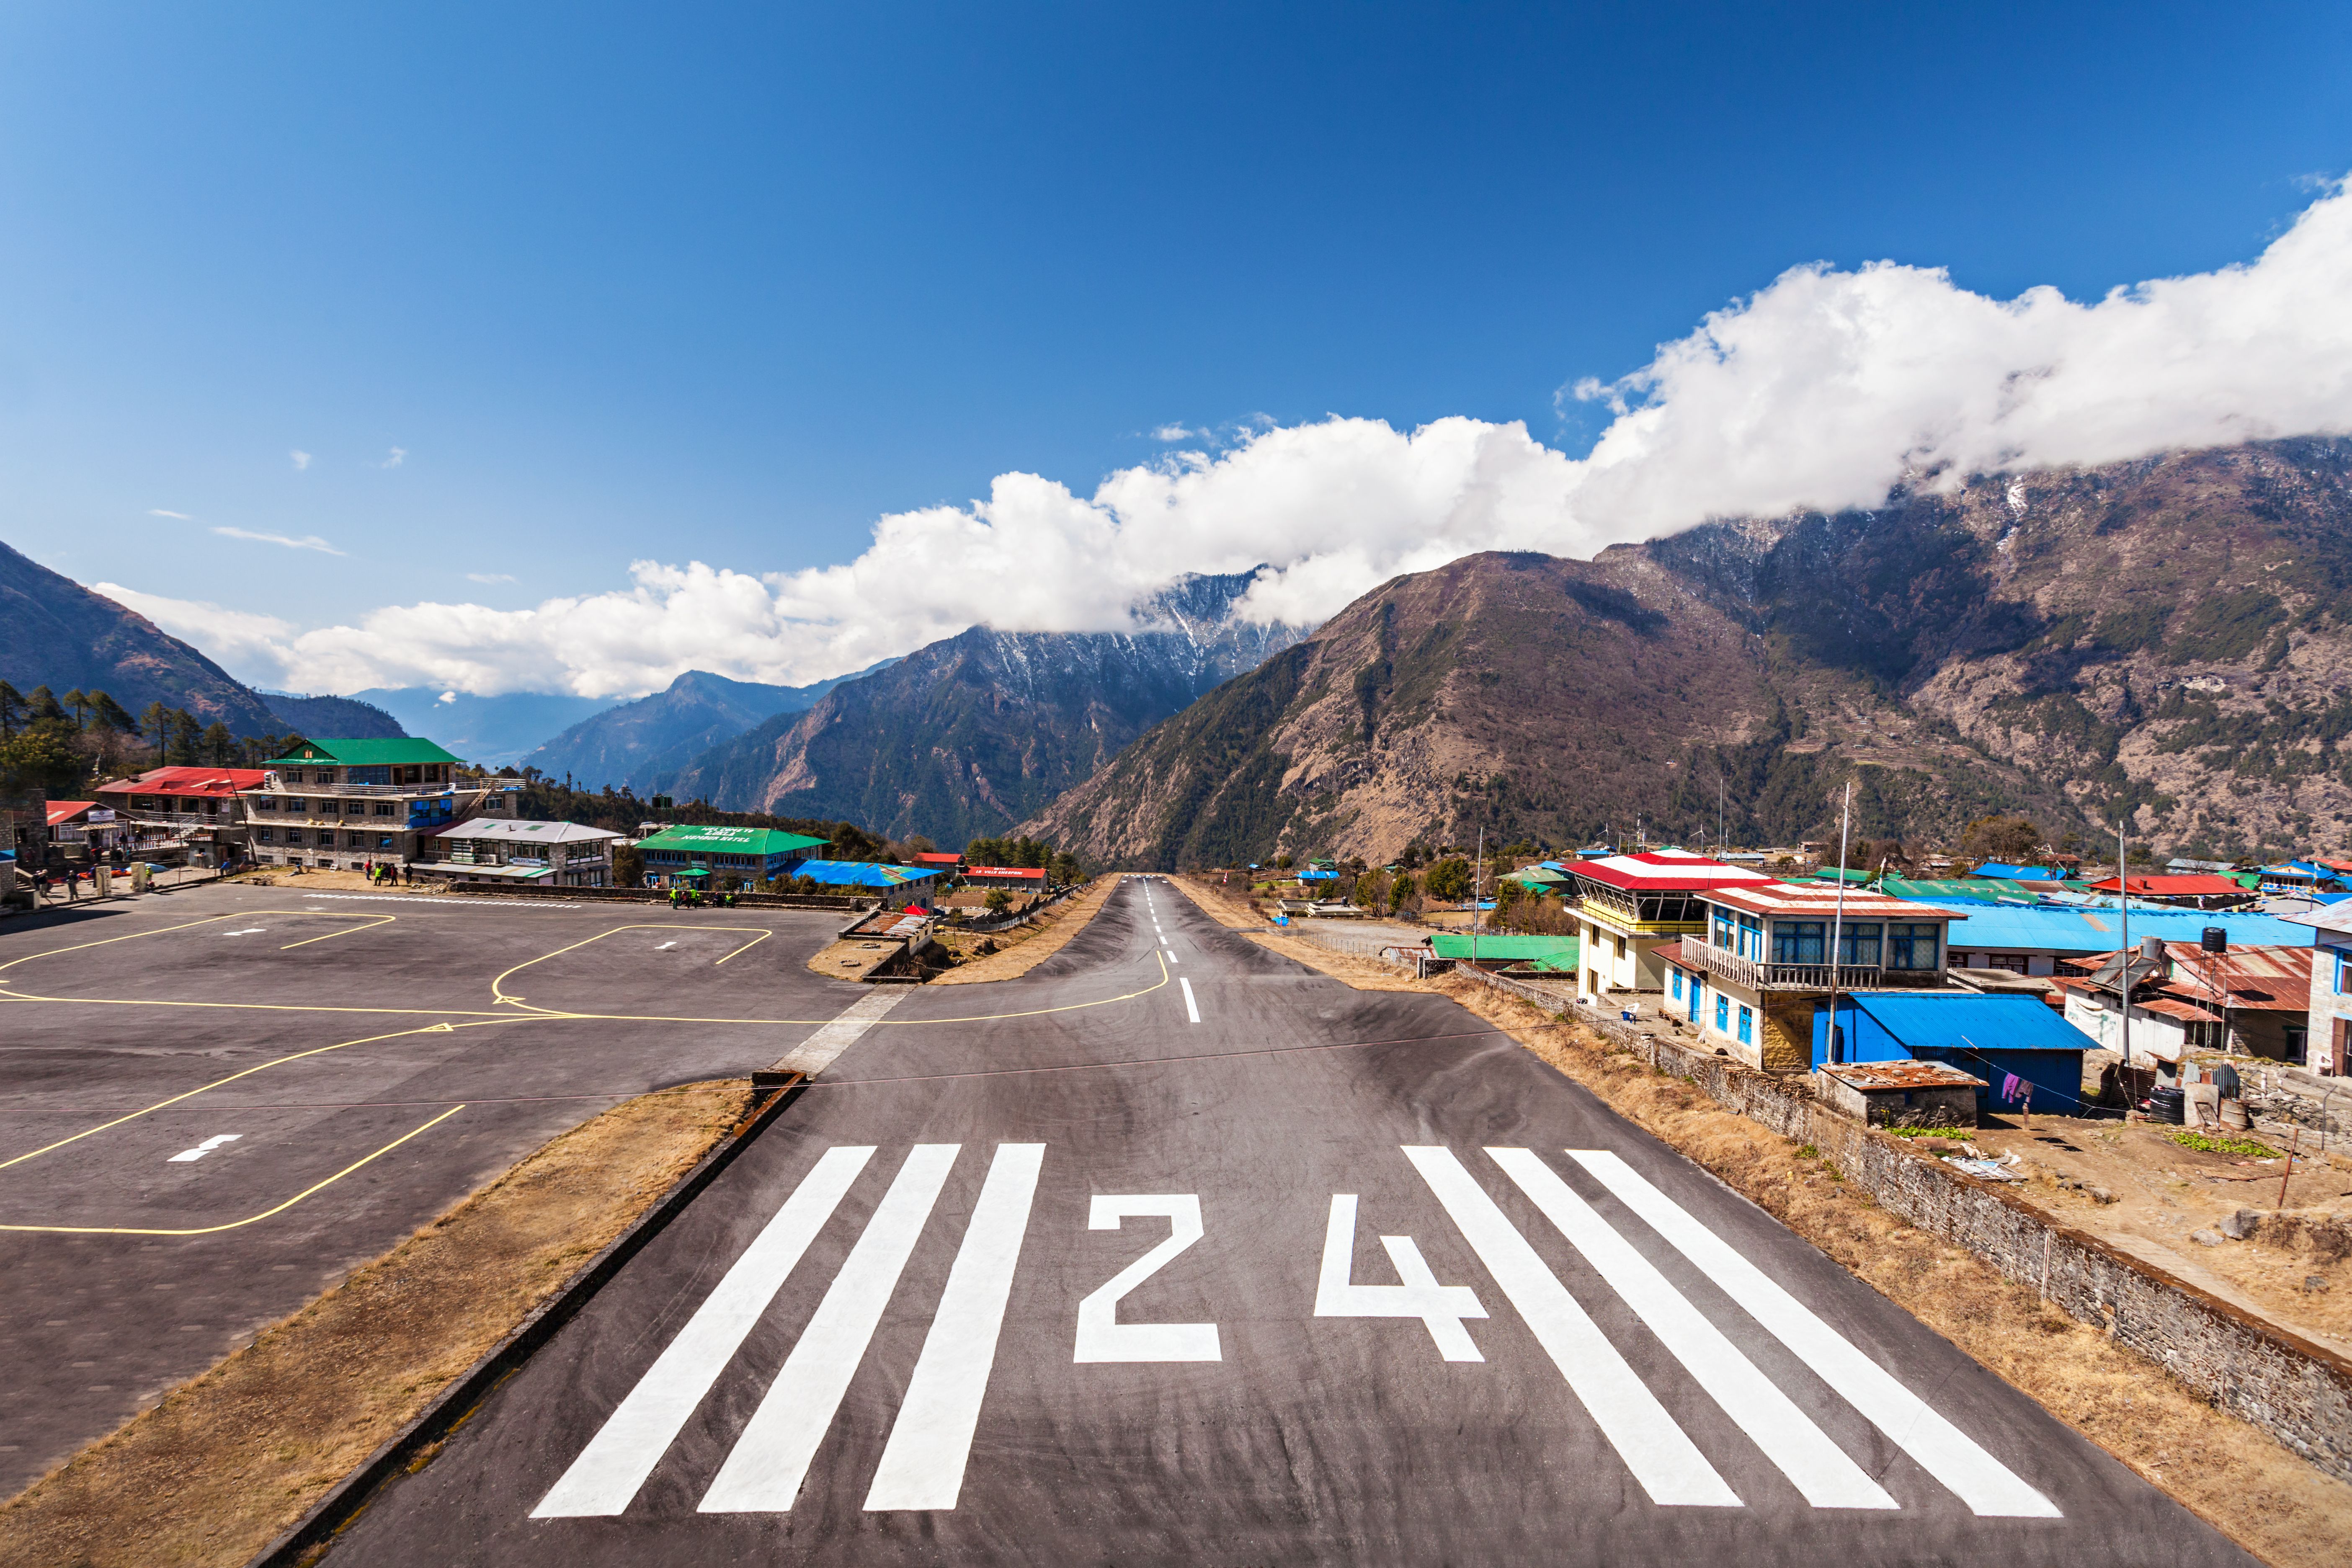 Looking out over Lukla Airport's Runway.